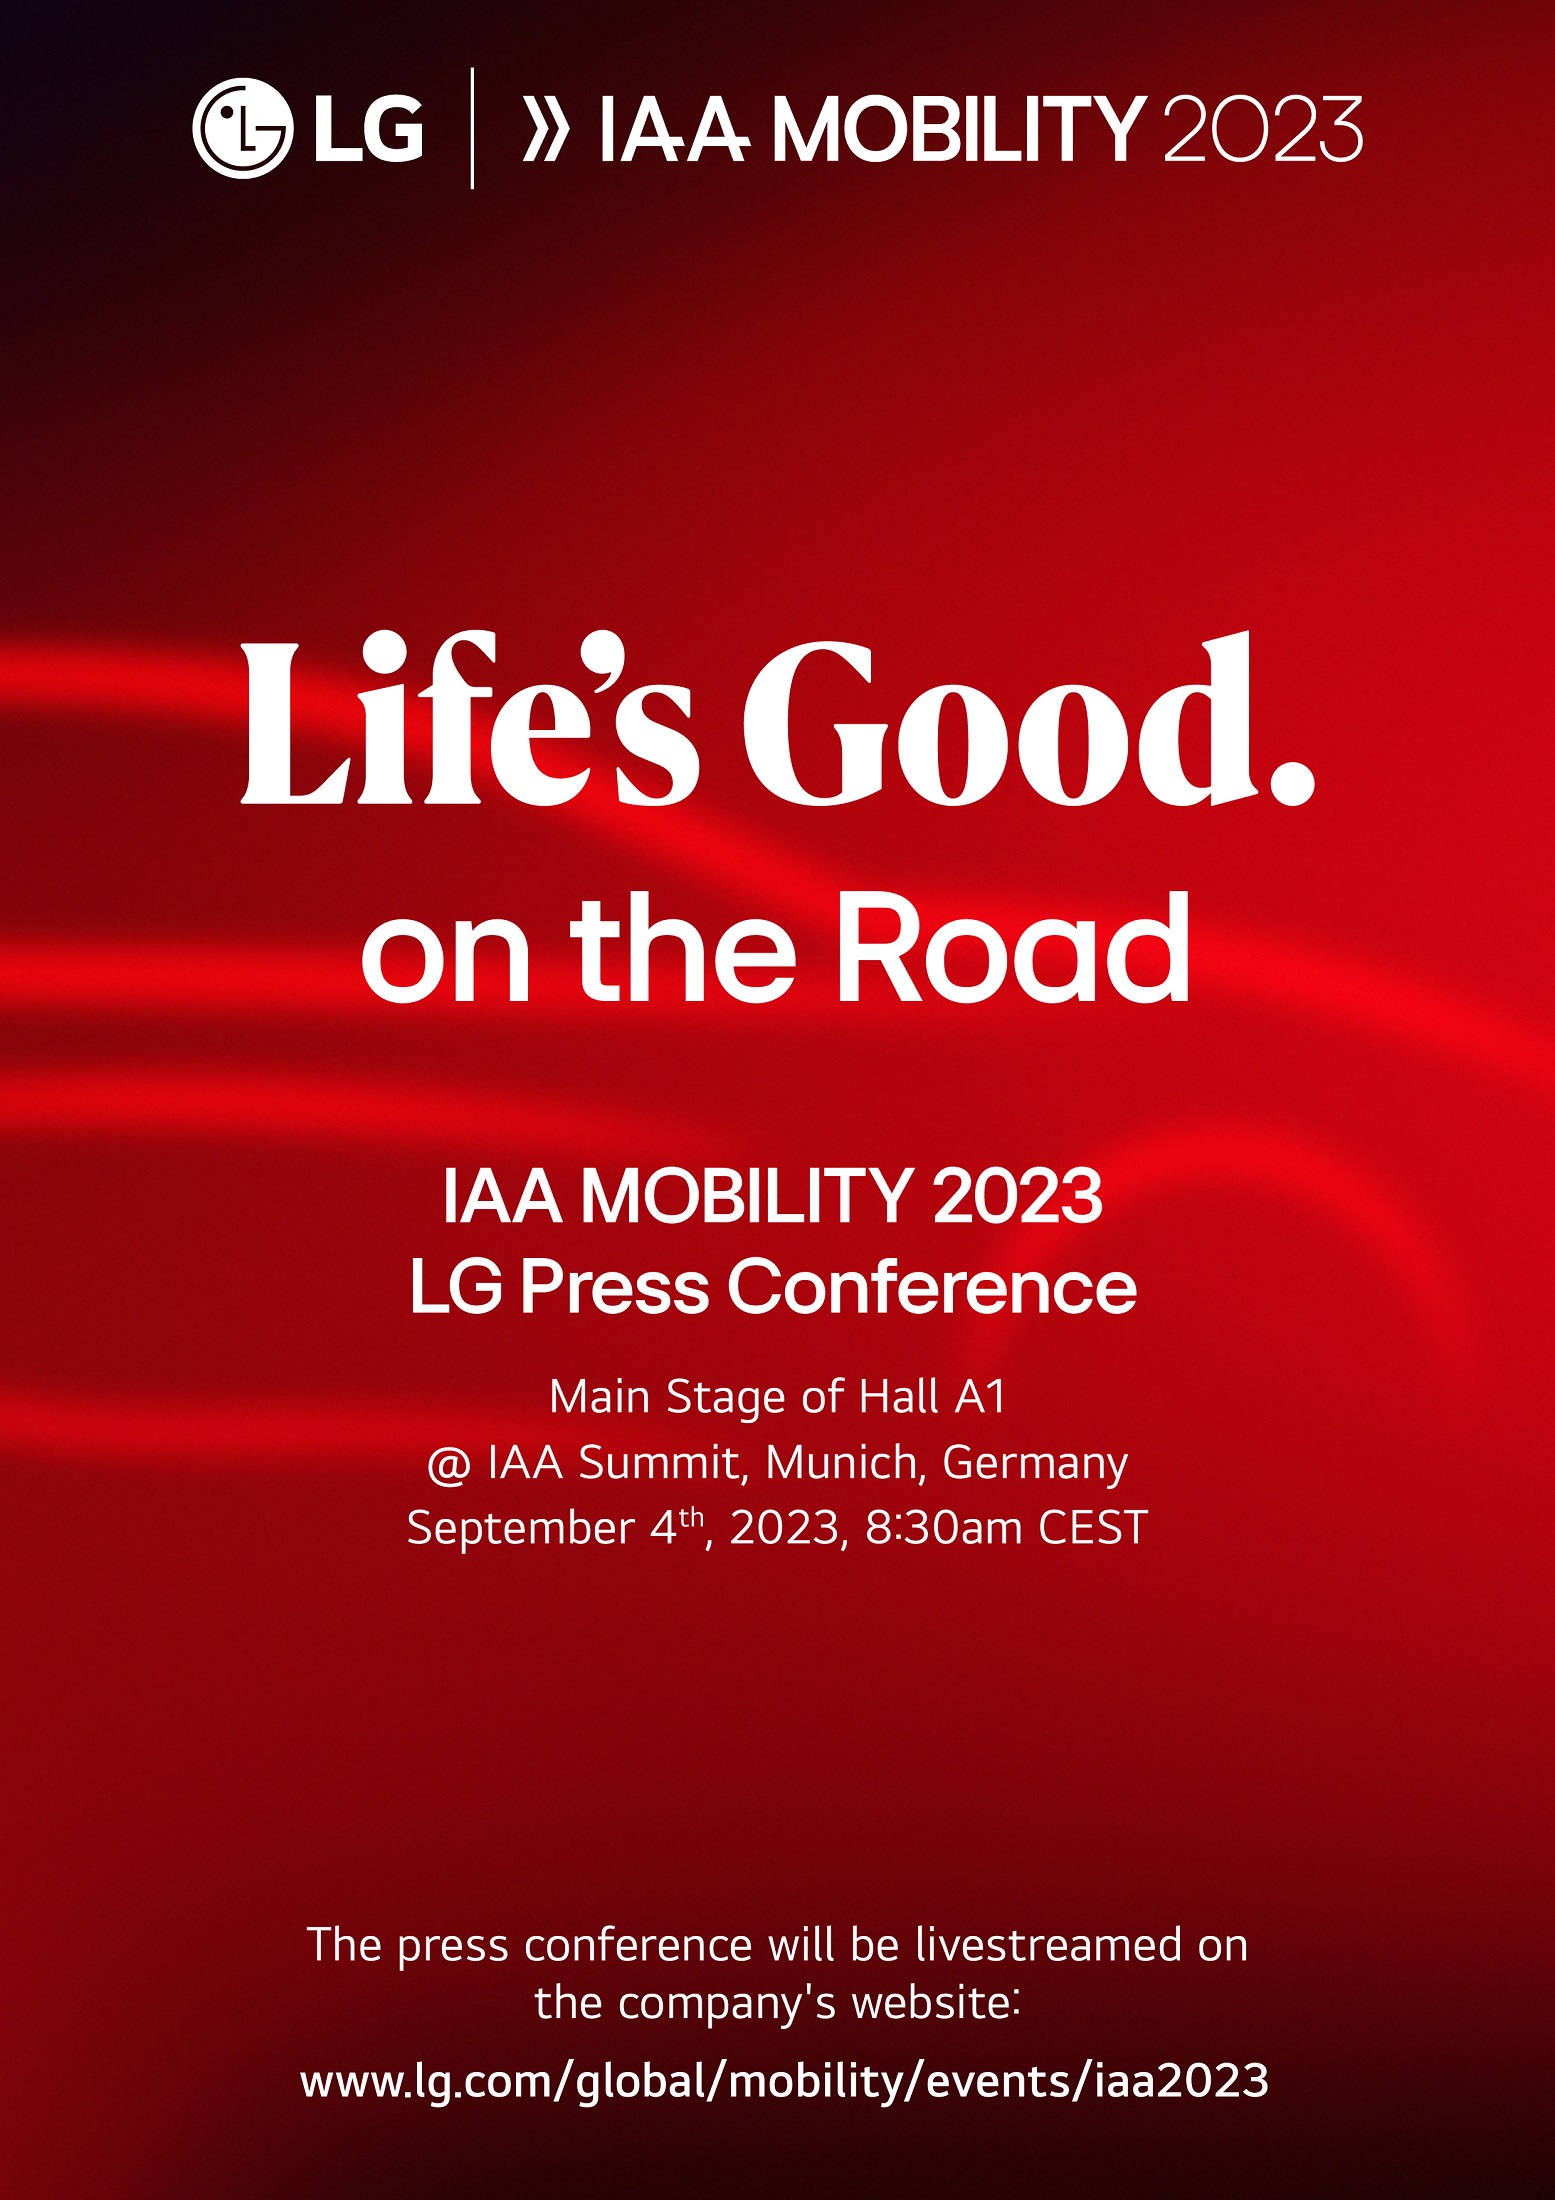 A promotional image of LG Press Conference at IAA Mobility 2023 with a phrase 